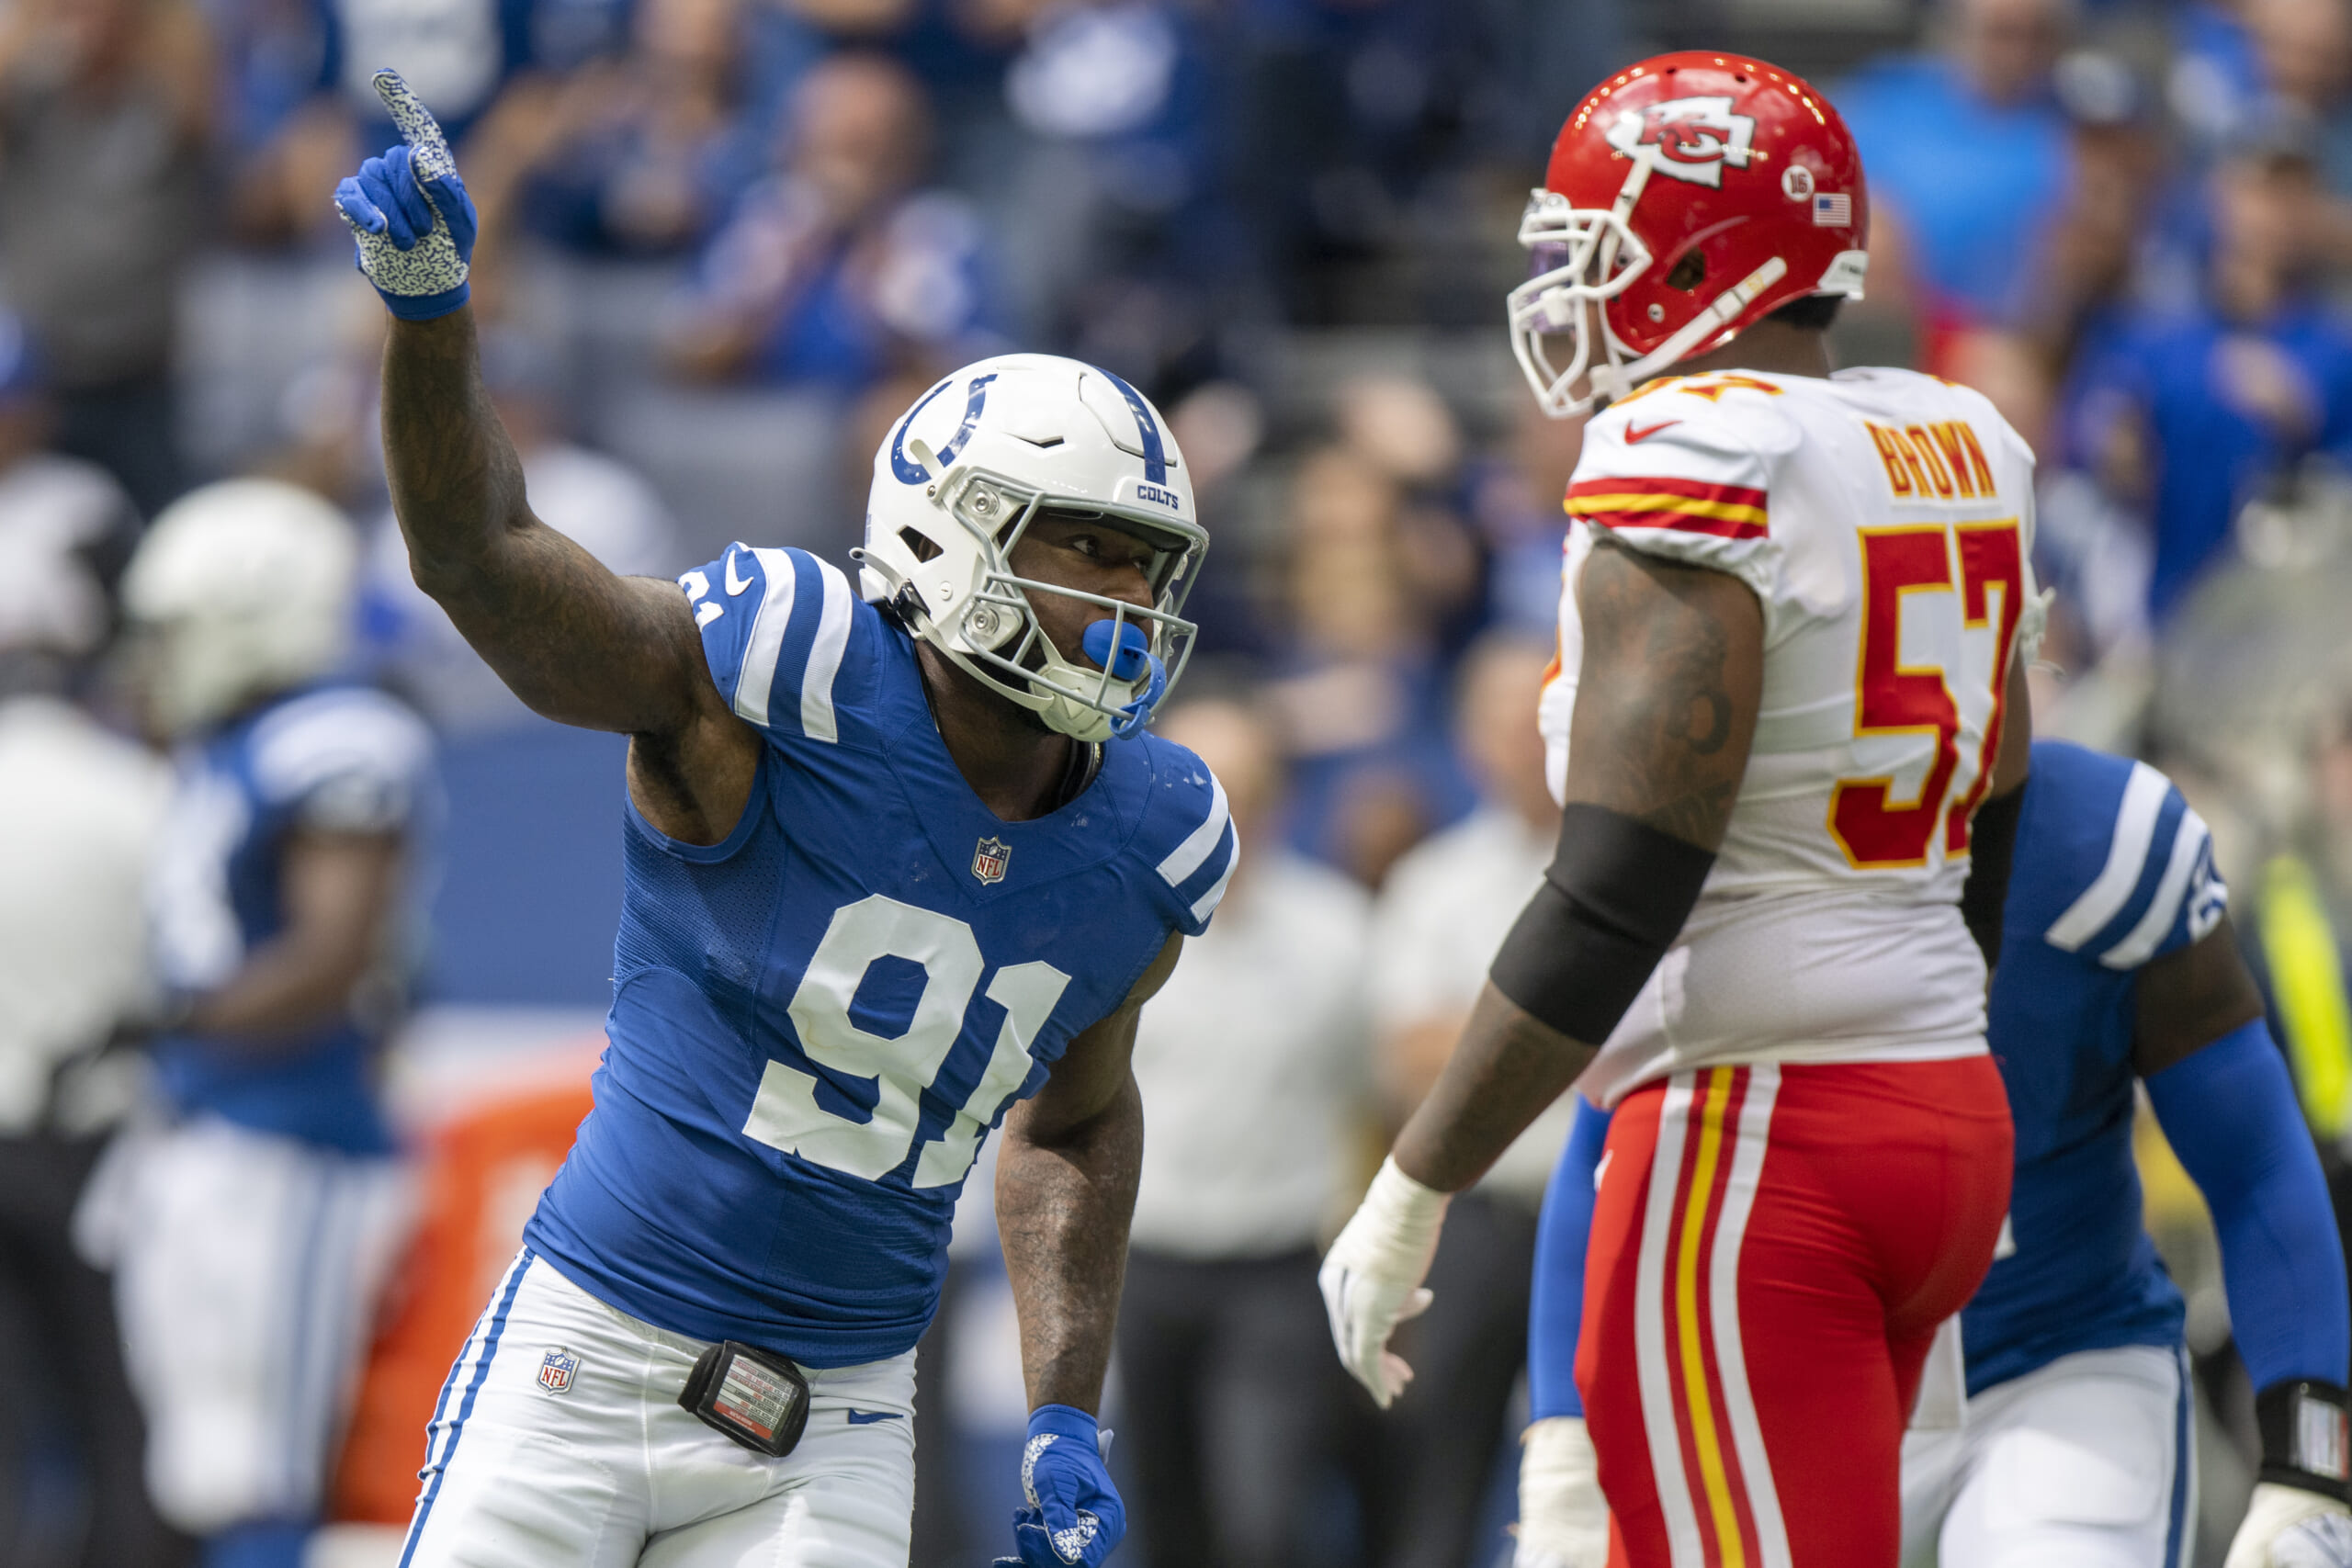 Sep 25, 2022; Indianapolis, Indiana, USA; Indianapolis Colts defensive end Yannick Ngakoue (91) celebrates sacking Kansas City Chiefs quarterback Patrick Mahomes (not pictured) during the second quarter at Lucas Oil Stadium. Mandatory Credit: Marc Lebryk-USA TODAY Sports